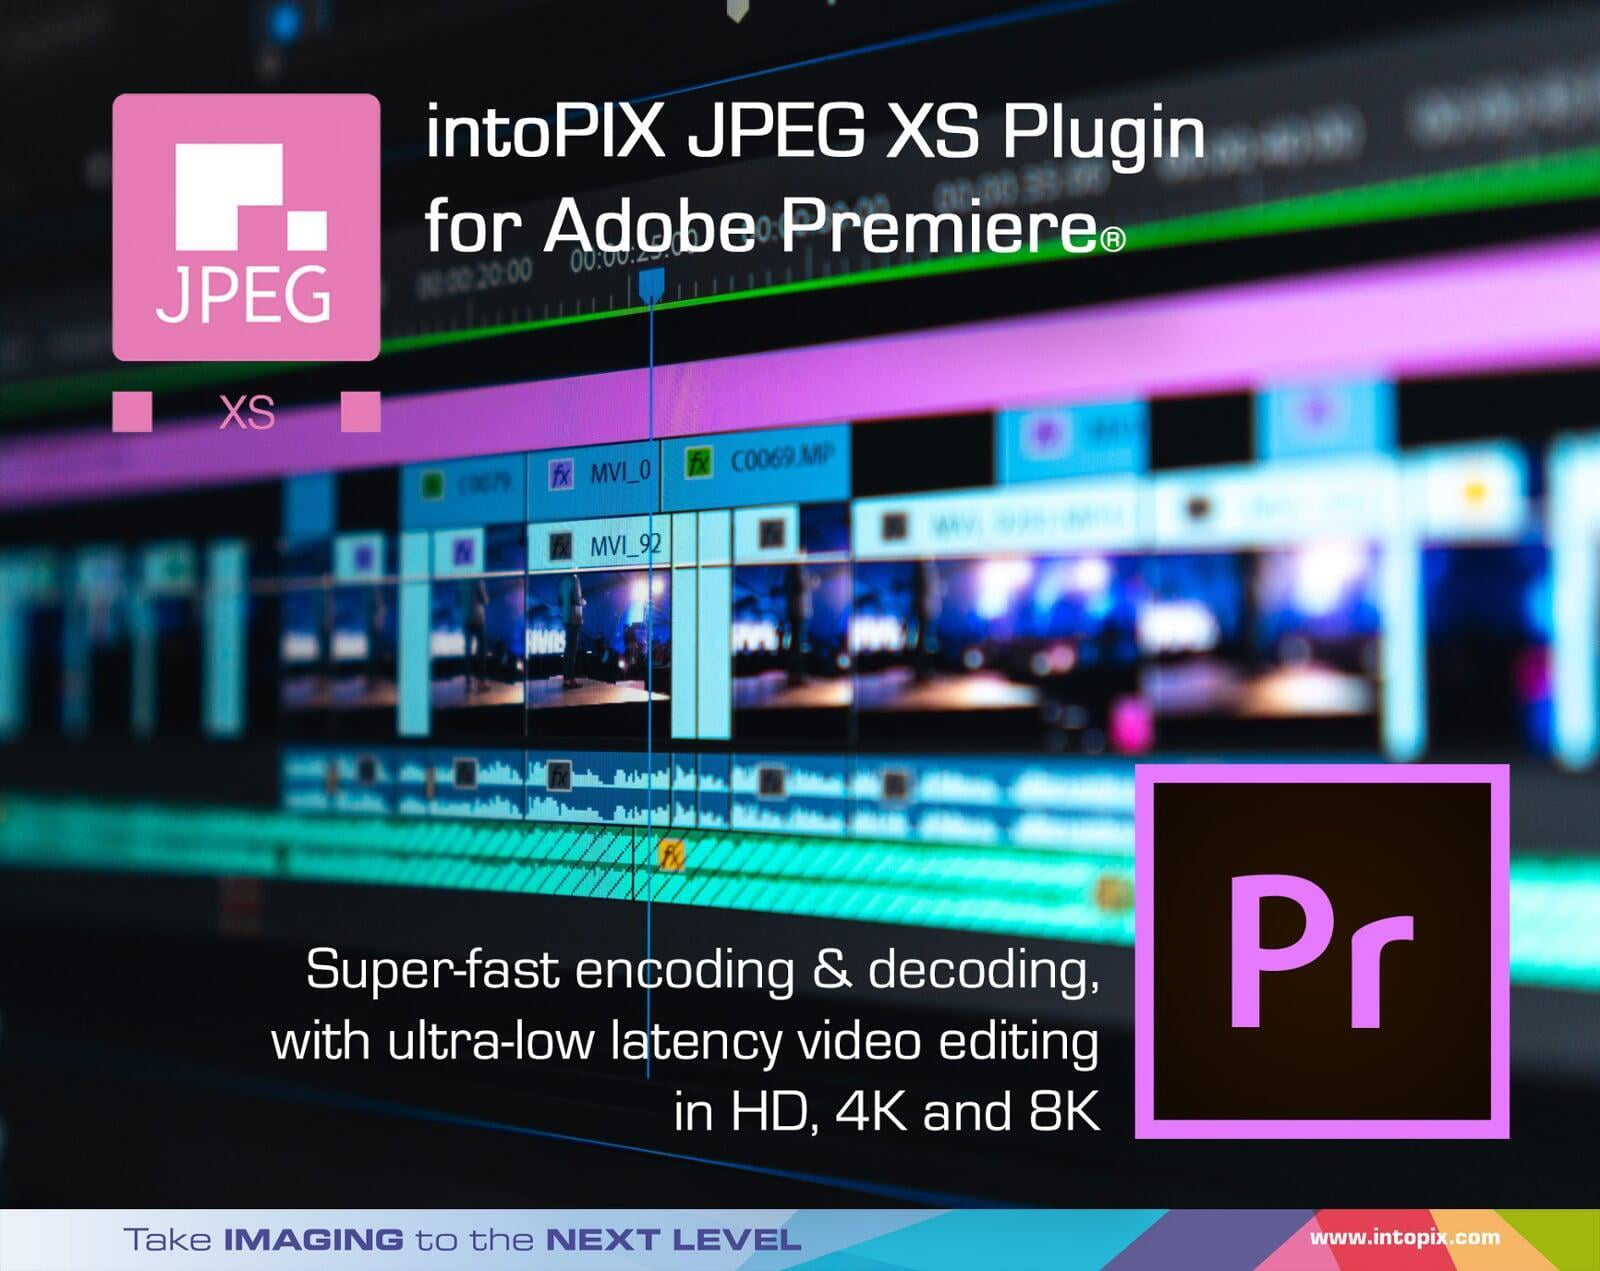 Adopt the intoPIX JPEG XS Plugin for Adobe Premiere® and ease your live video workflow 